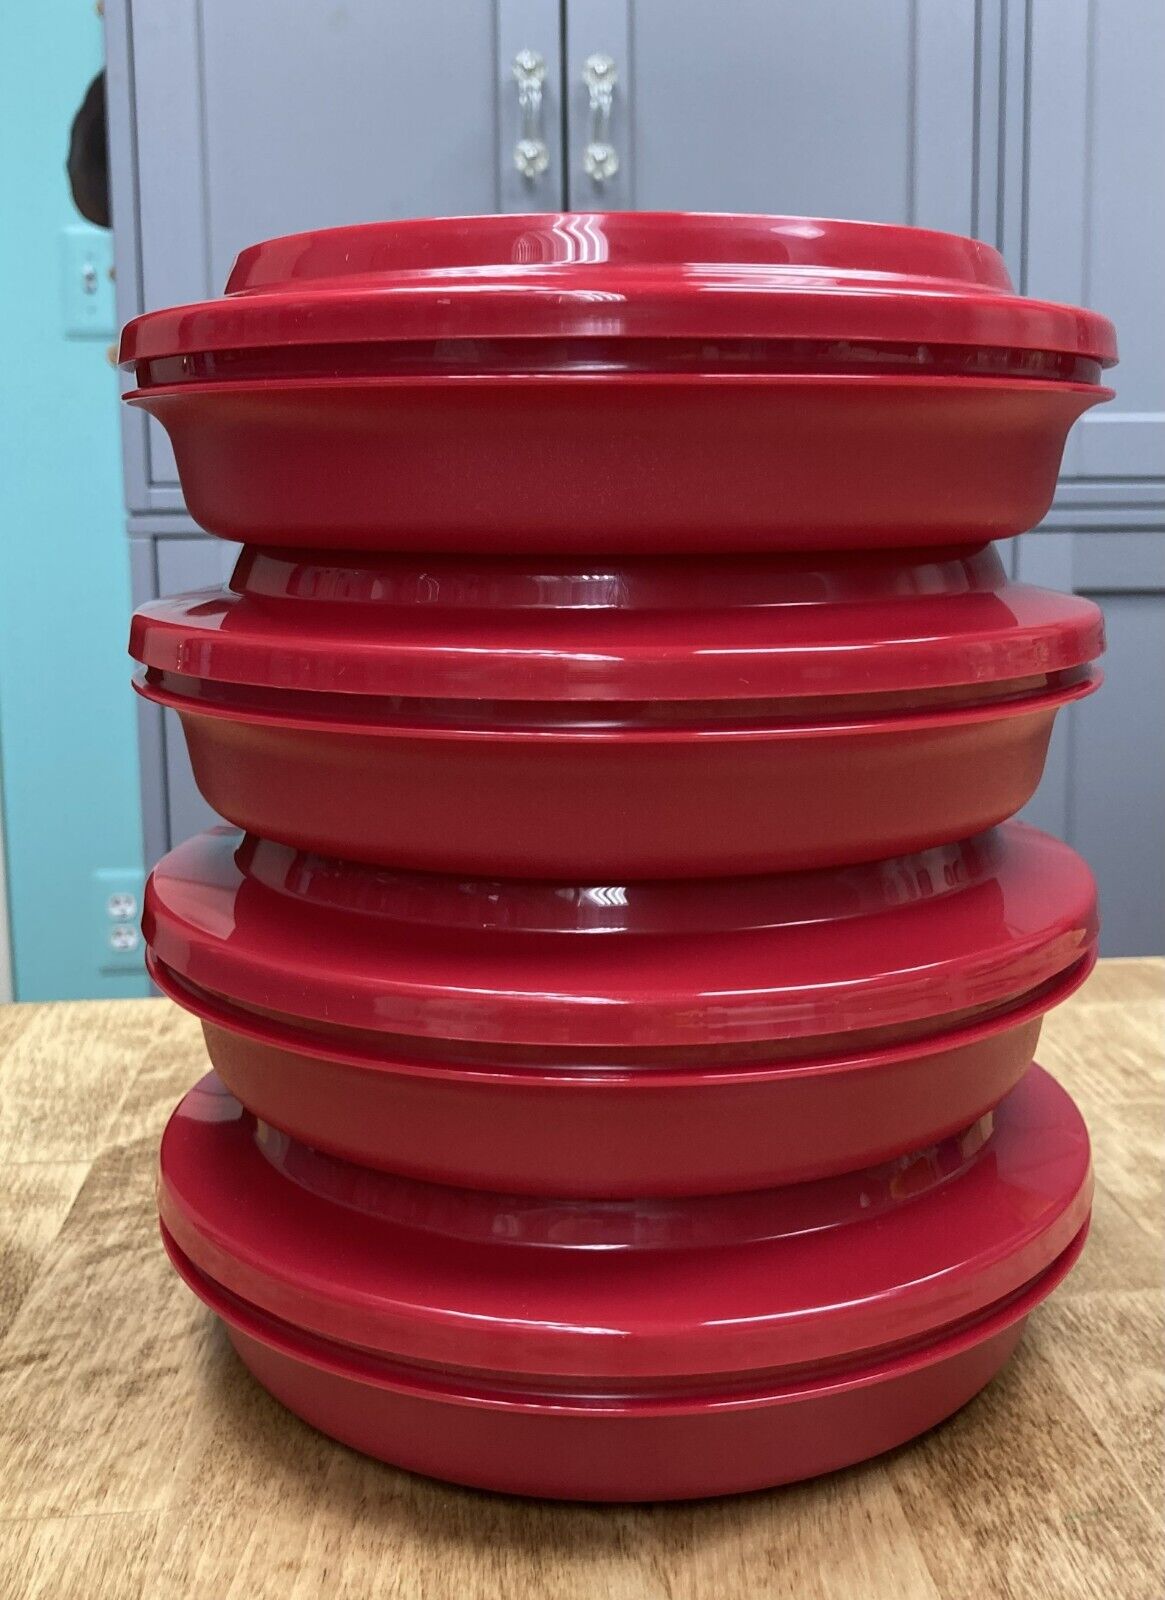 Tupperware Super Seal & Serve Set of 4 Bowls-#1336 & #1337-Red-NEW-SHIPPING INCL